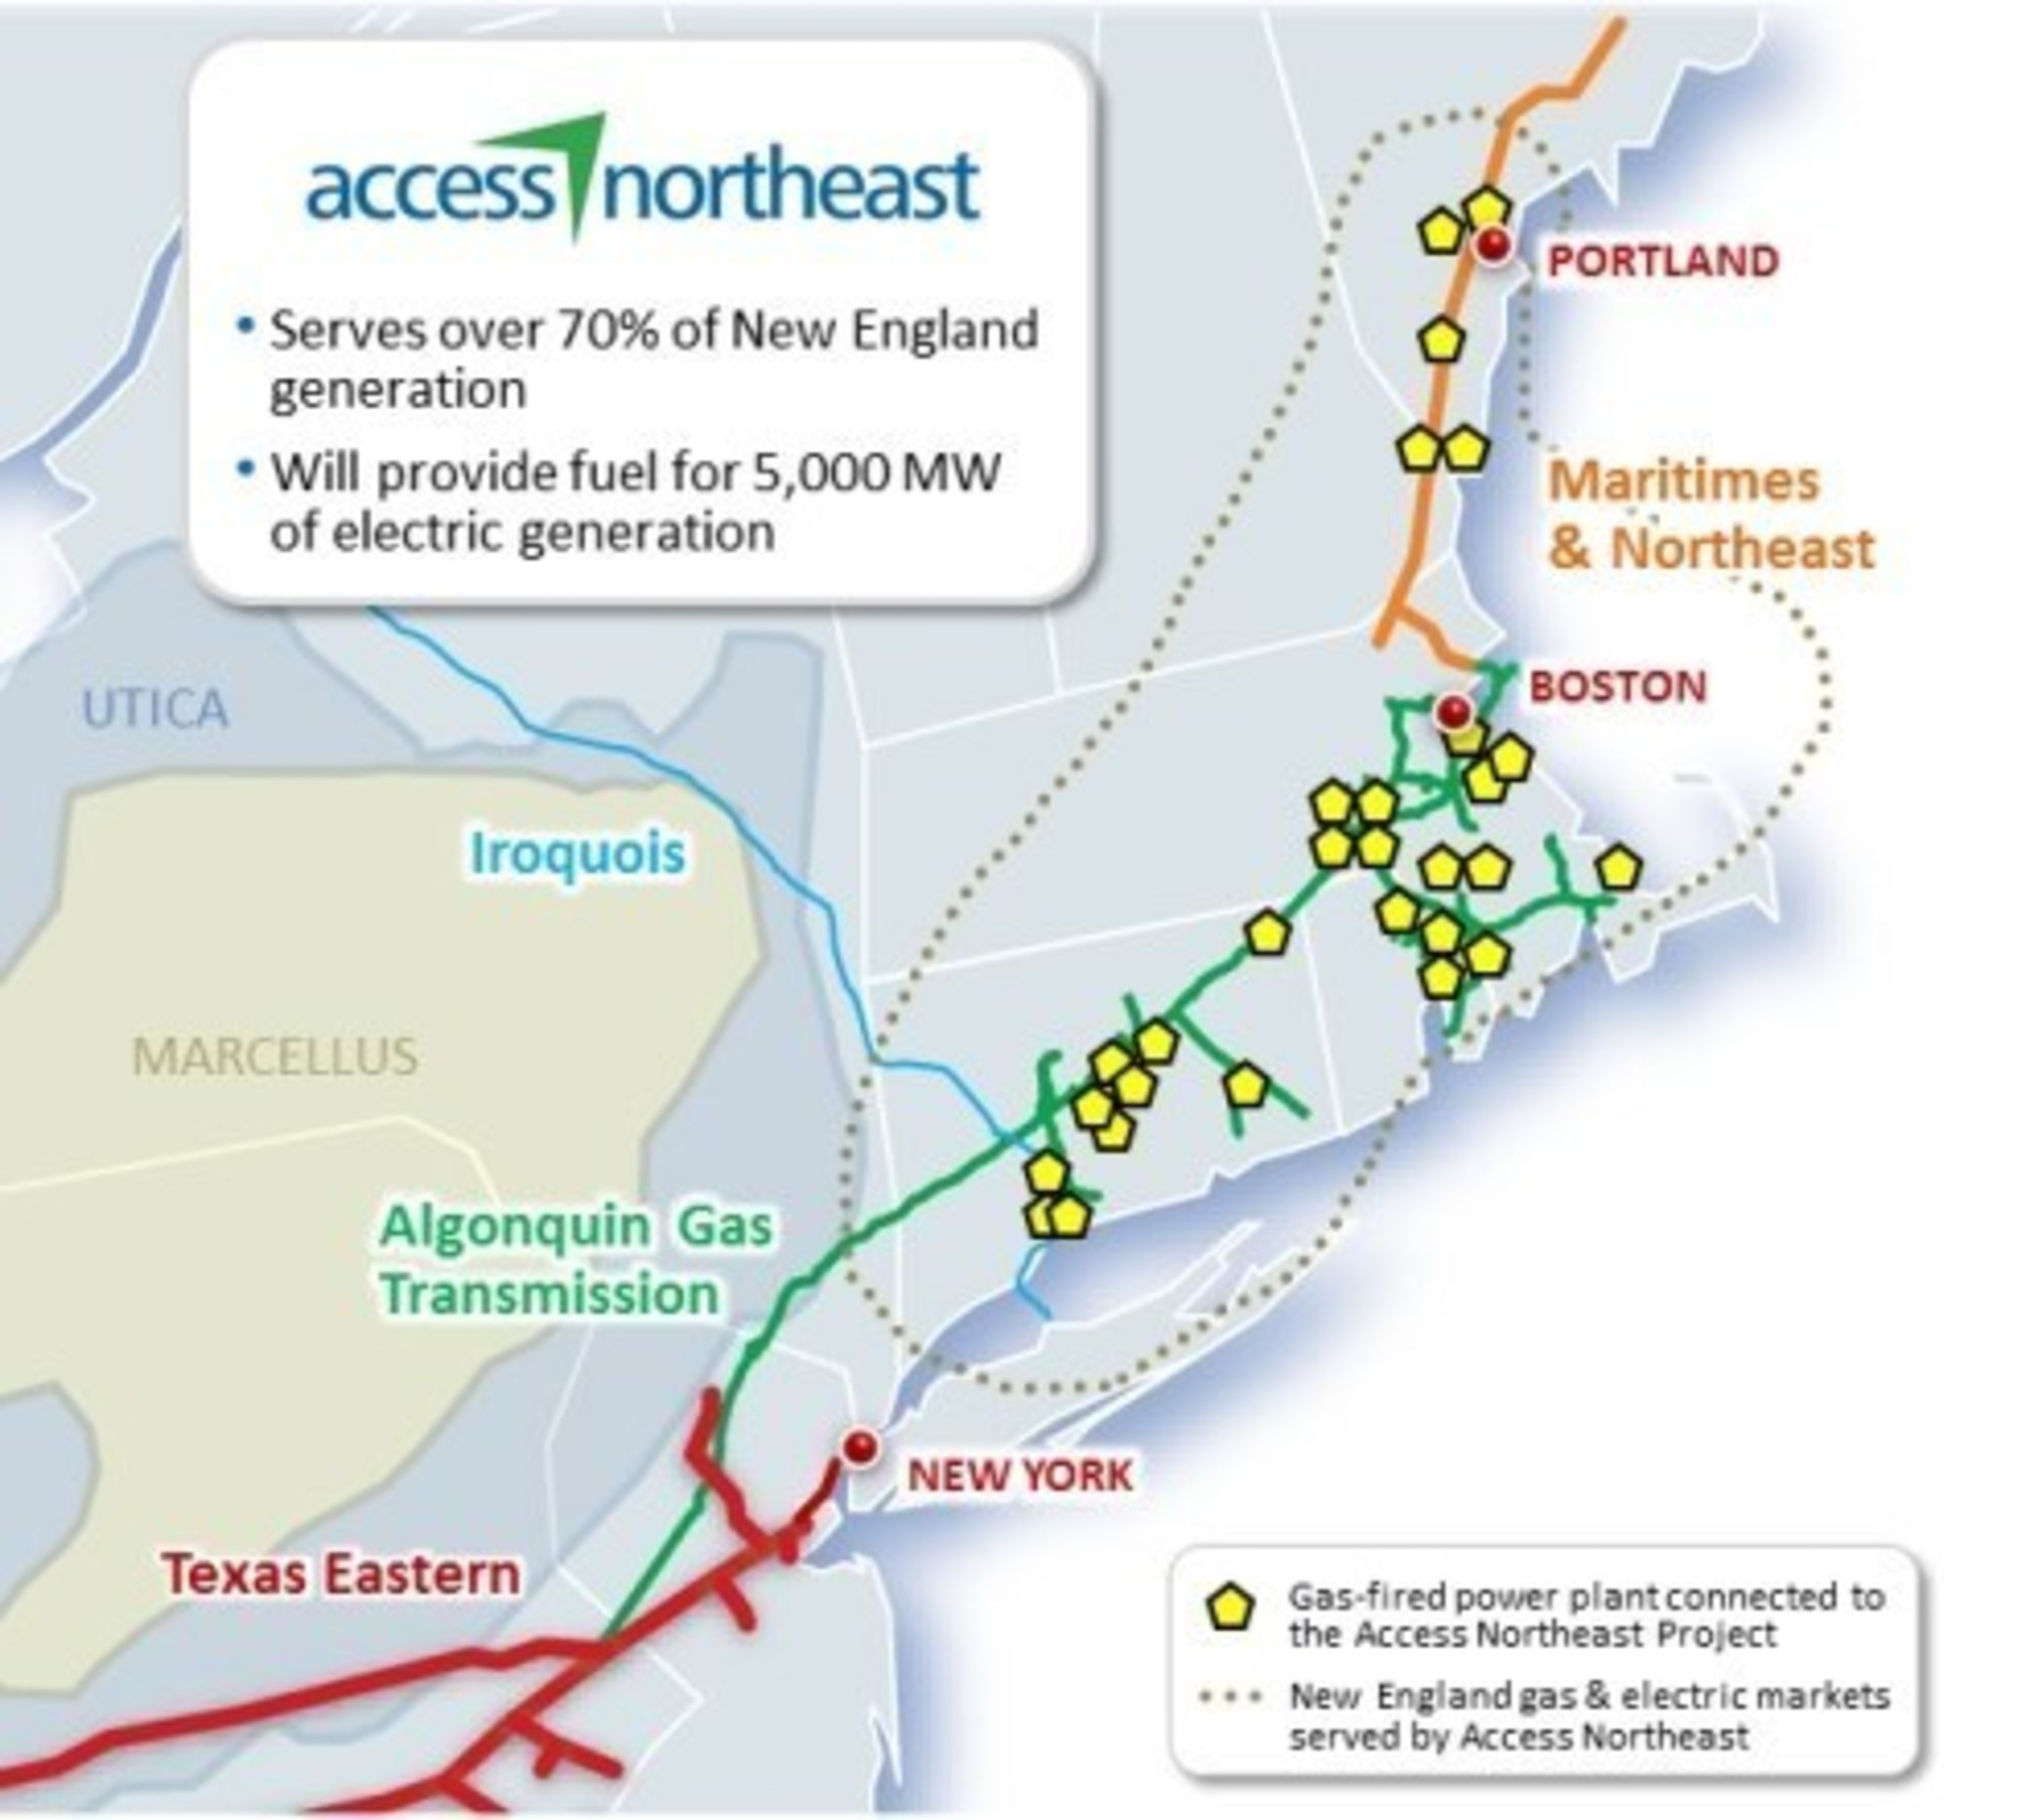 Gas-fired power plants connected to the Access Northeast project. Access Northeast is an innovative energy solution for New England.